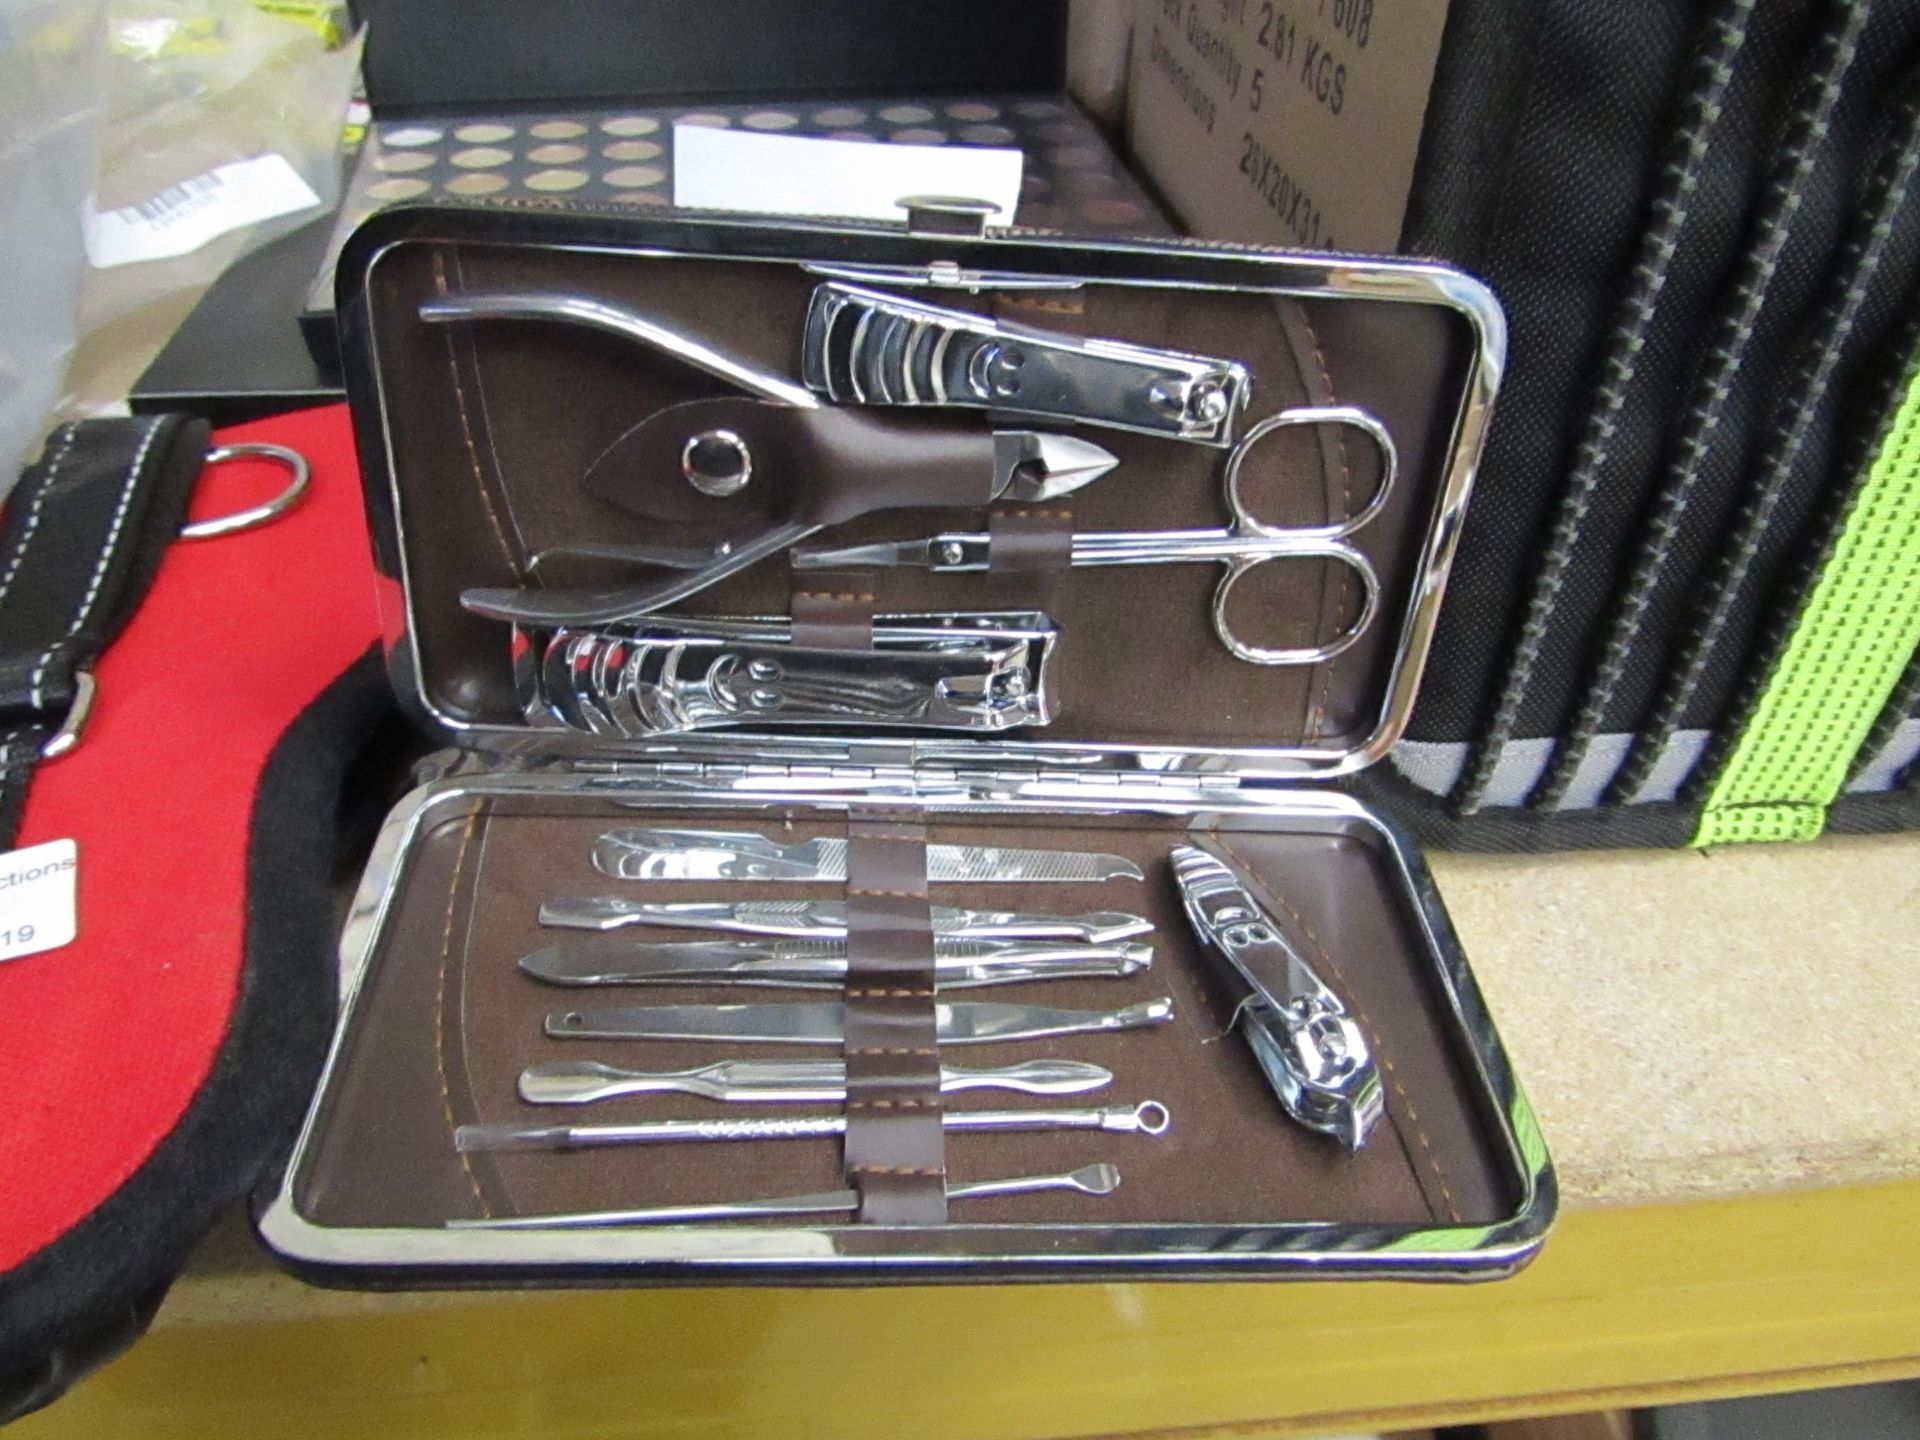 12 Piece Nail Care Set in a carryu case. New. Ideal Stocking Filler